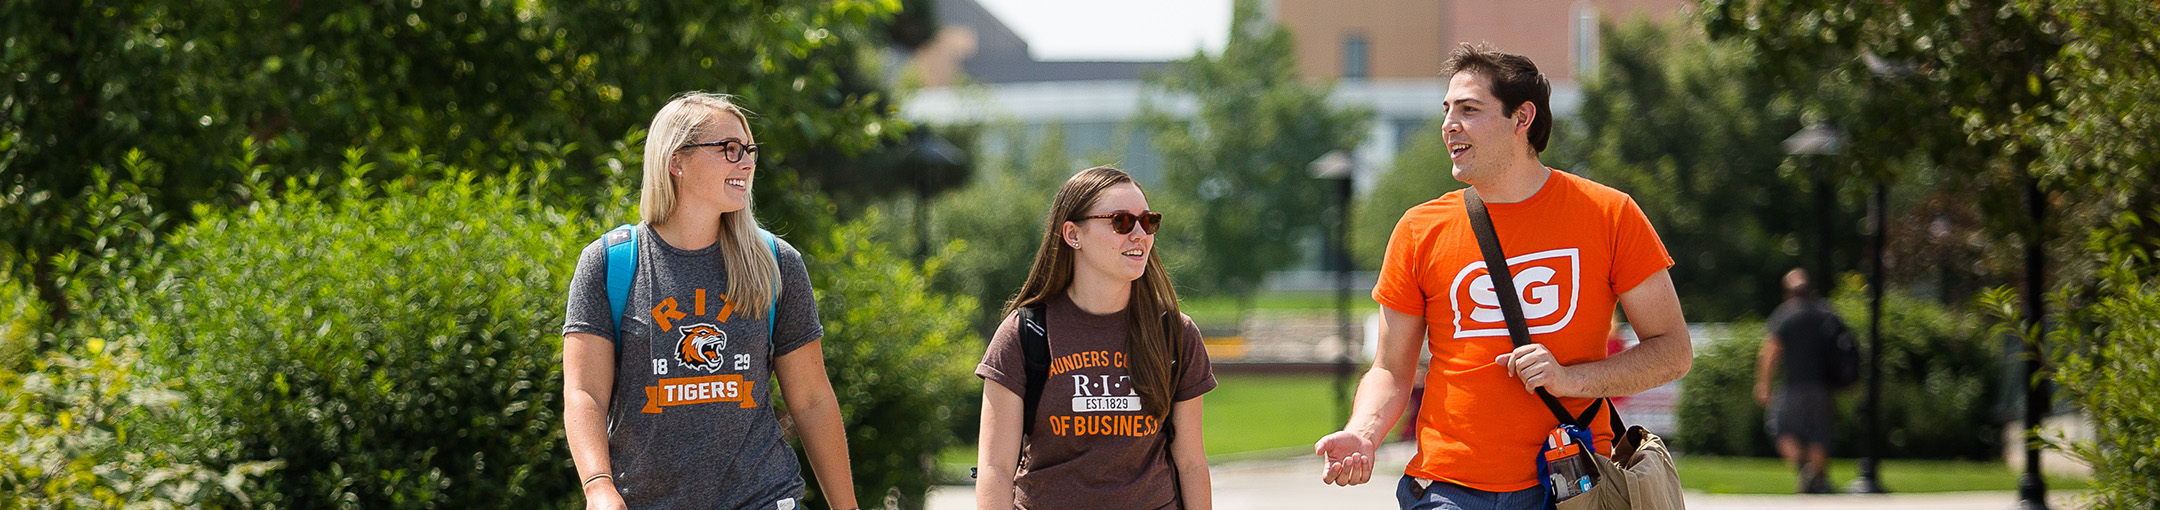 3 students walking next to each other wearing orange and brown shirts